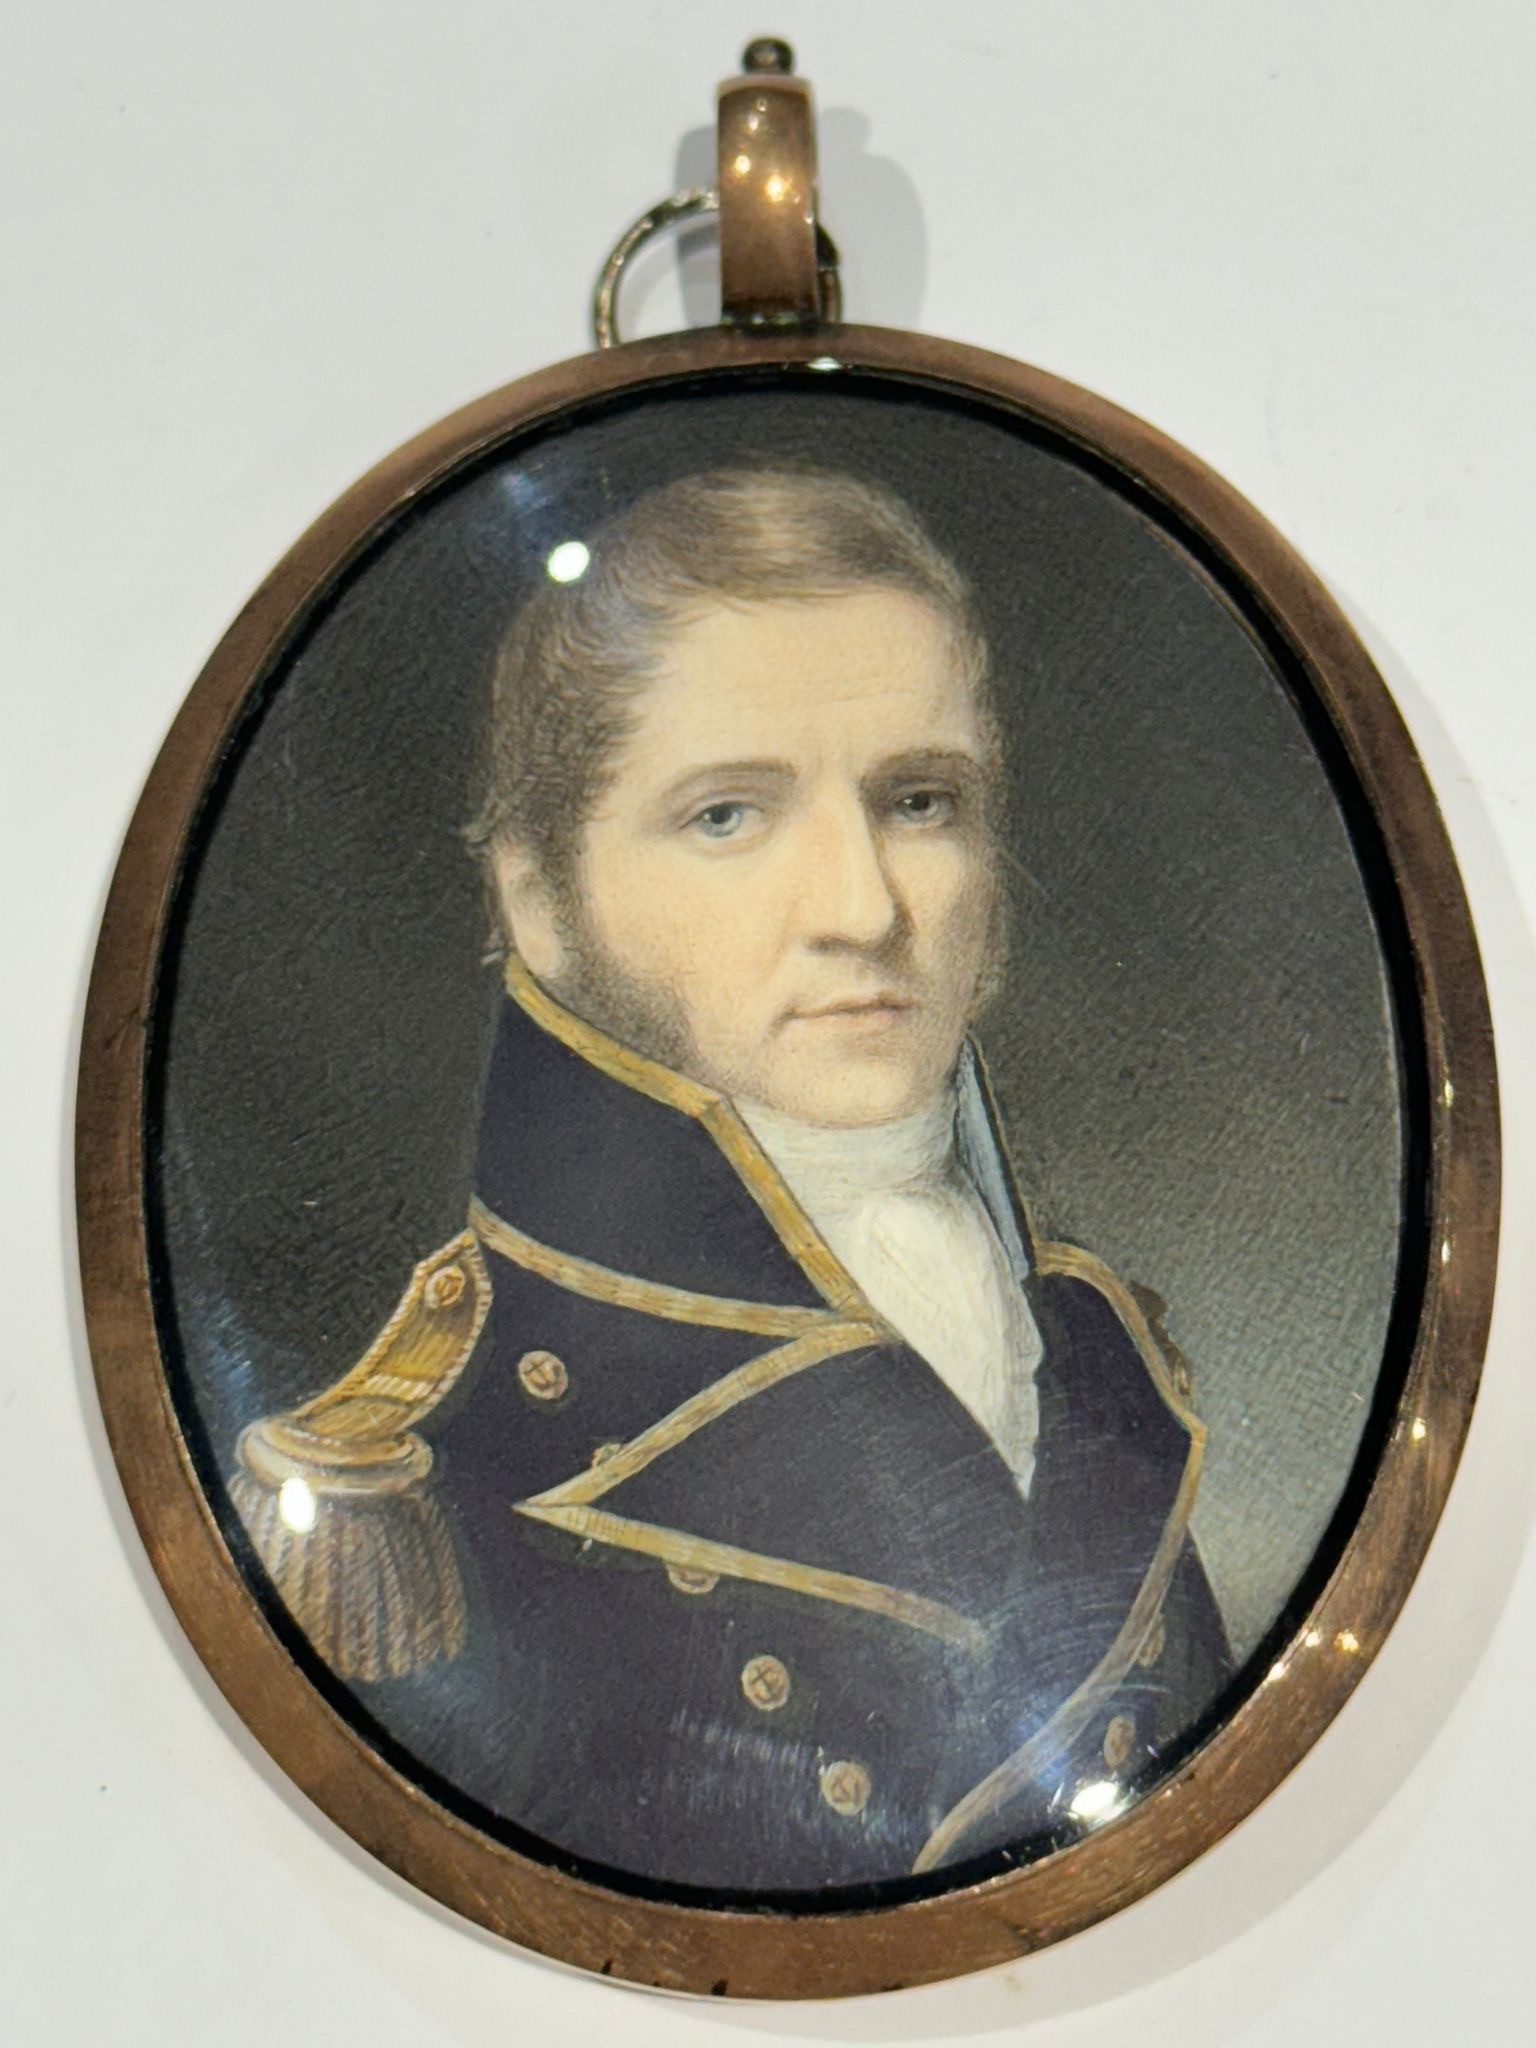 A Mid-19th century oval locket-back portrait miniature of a middle-aged senior Naval officer, with